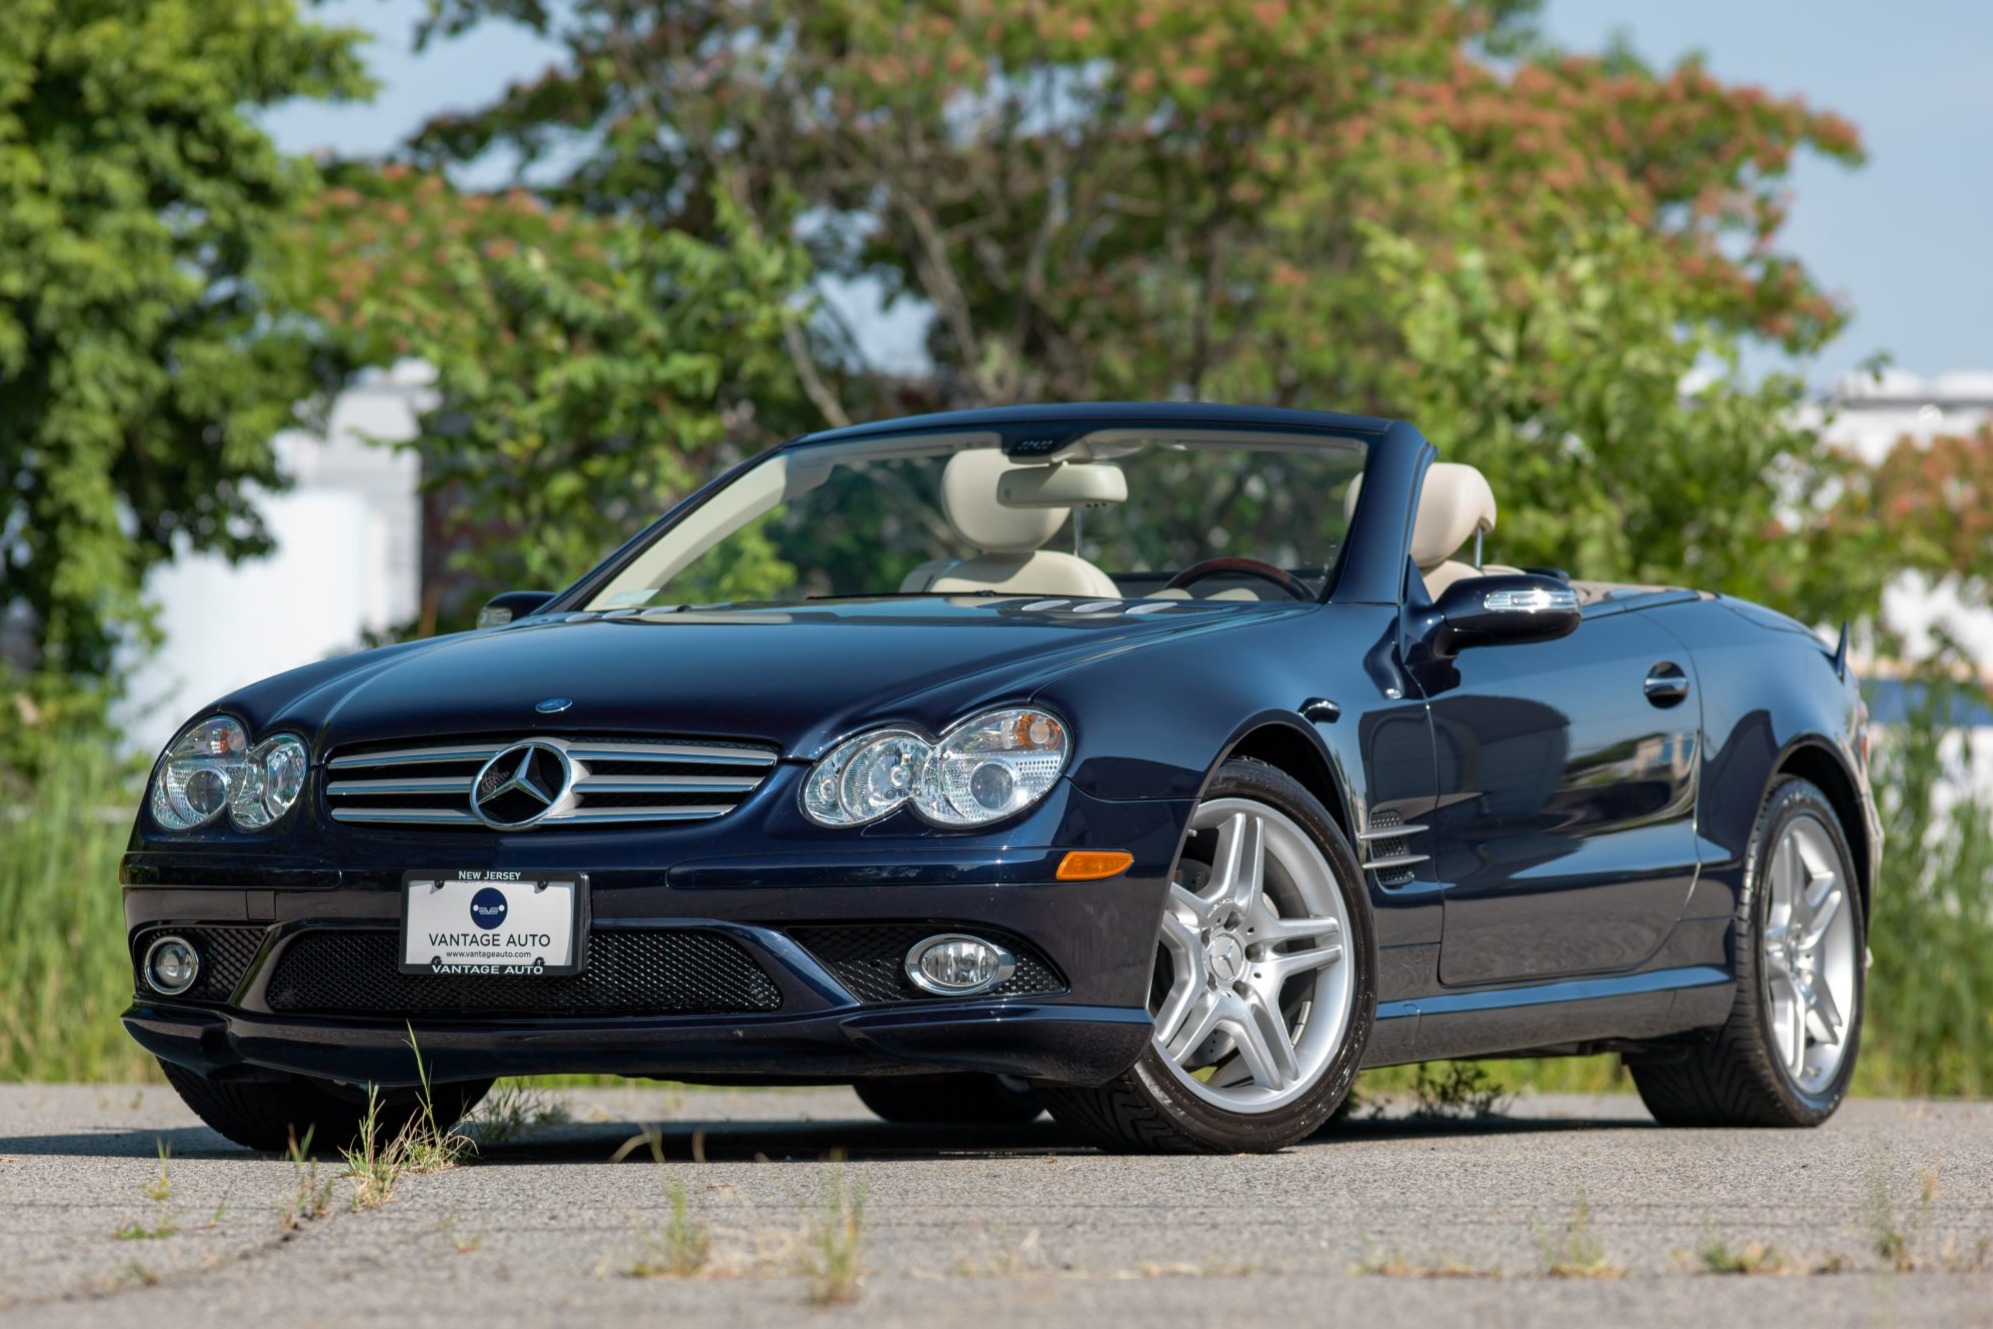 Used 11k-Mile 2008 Mercedes-Benz SL550 Review